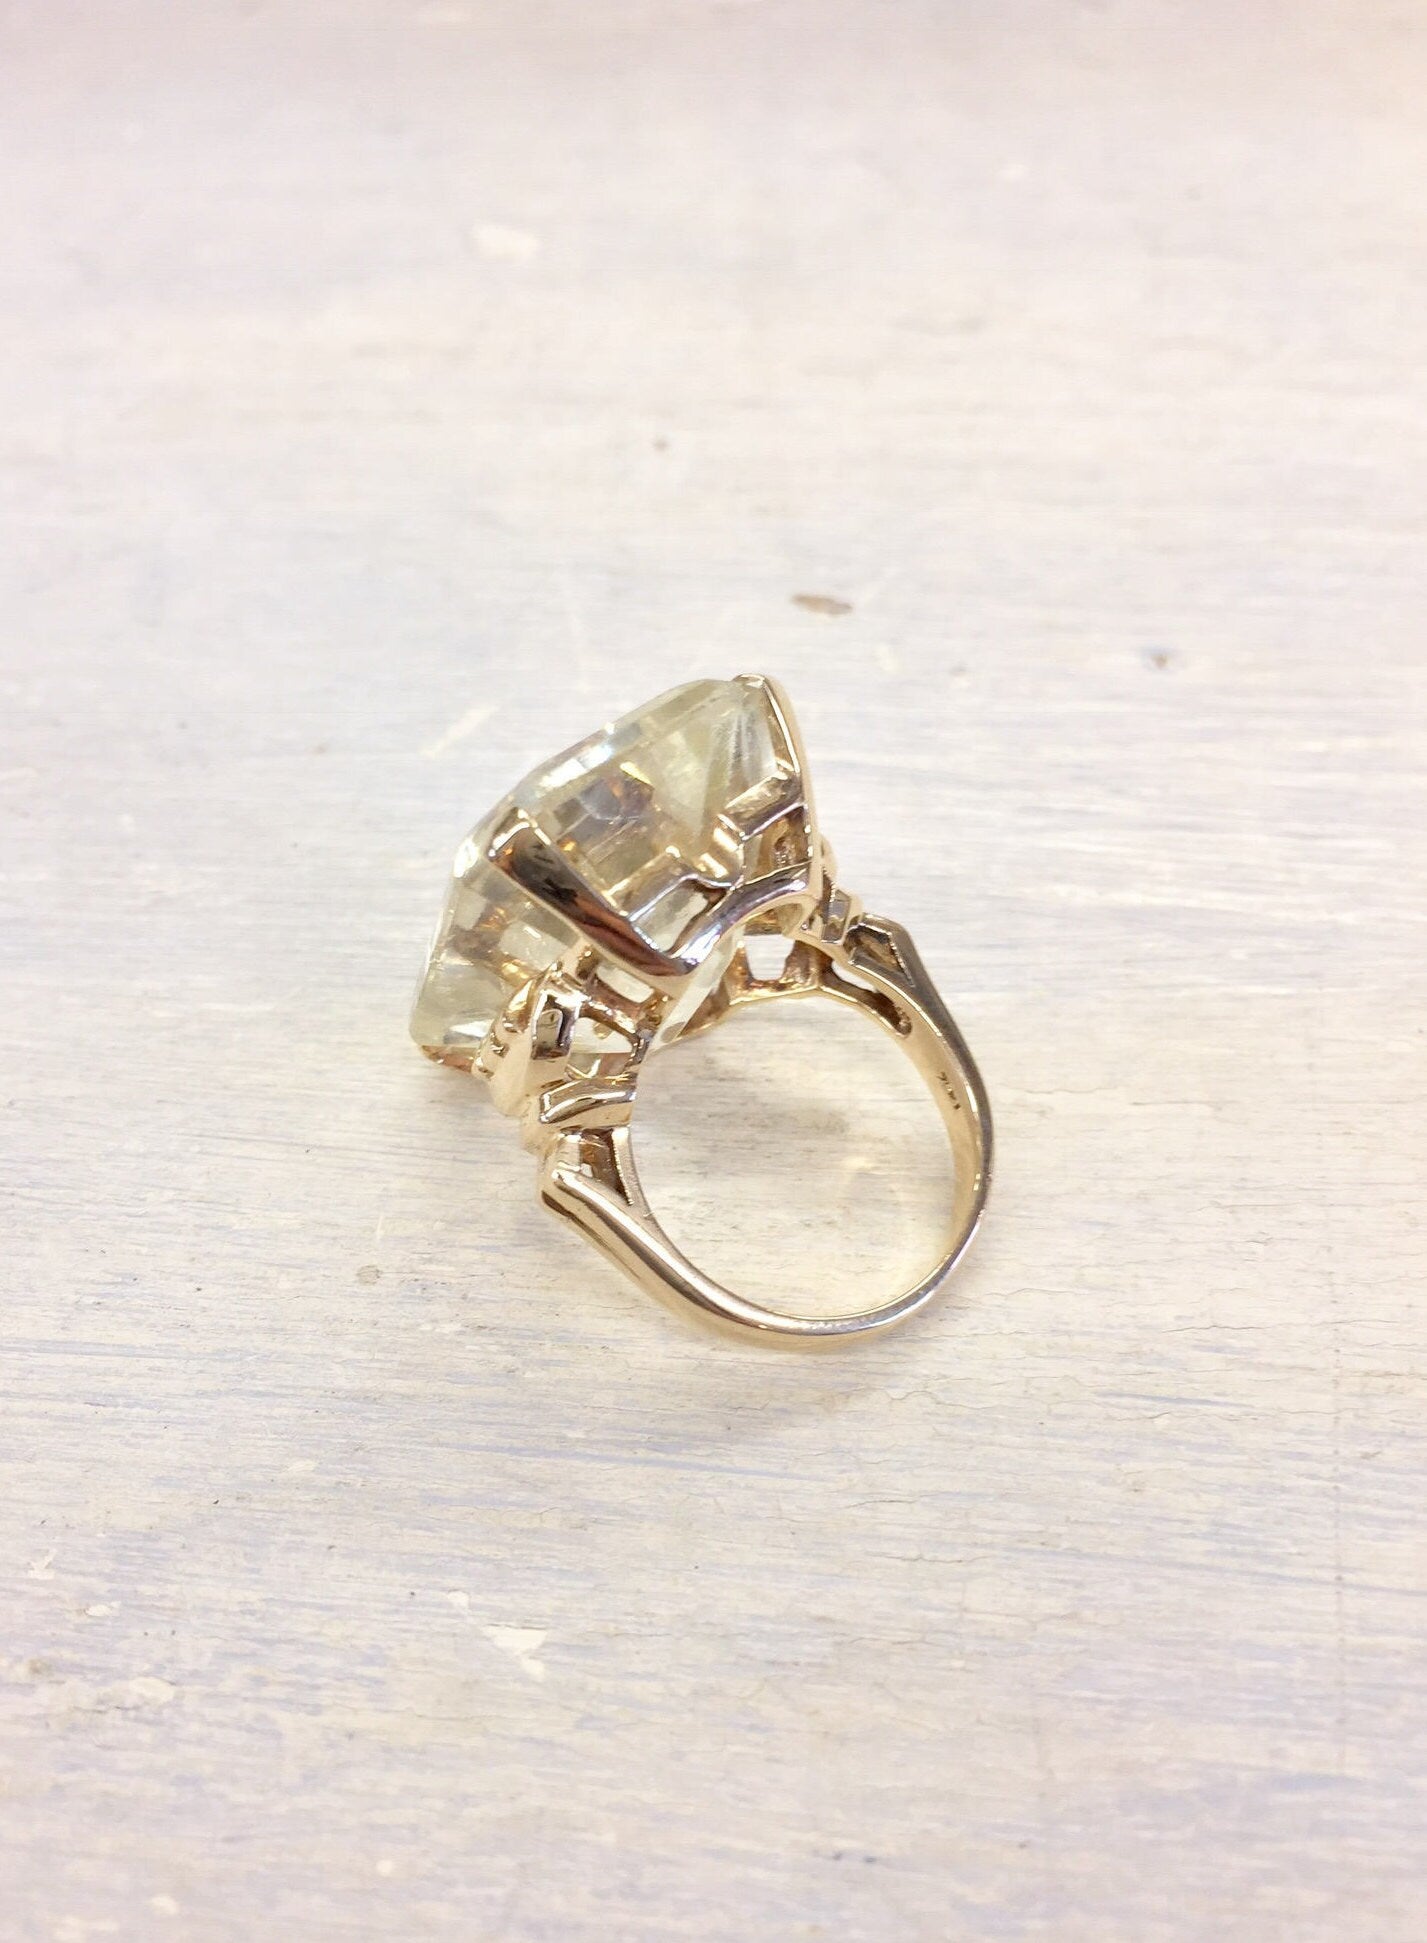 14 karat yellow gold vintage cocktail ring with large faceted gemstone on light wooden surface, viewed from above.